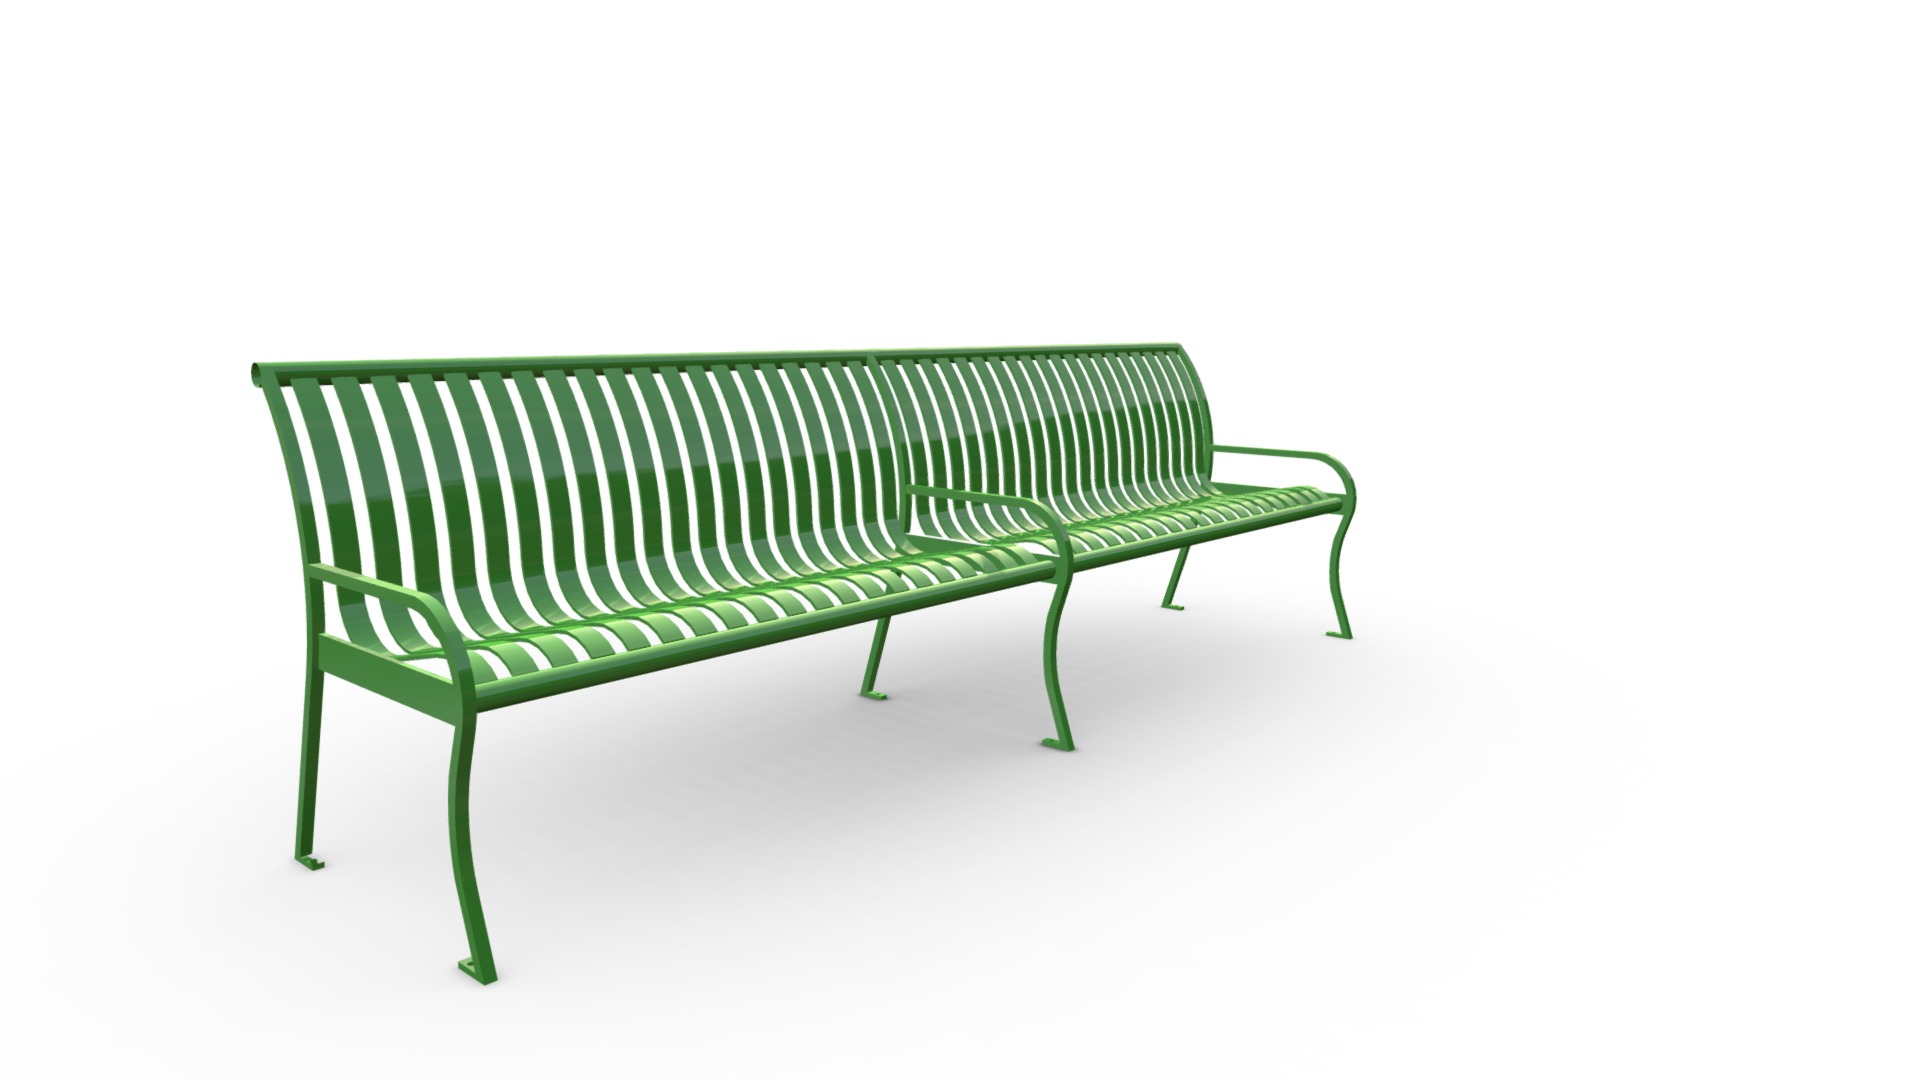 3D model SC-05.2,7 - This is a 3D model of the SC-05.2,7. The 3D model is about a green bench with a white background.